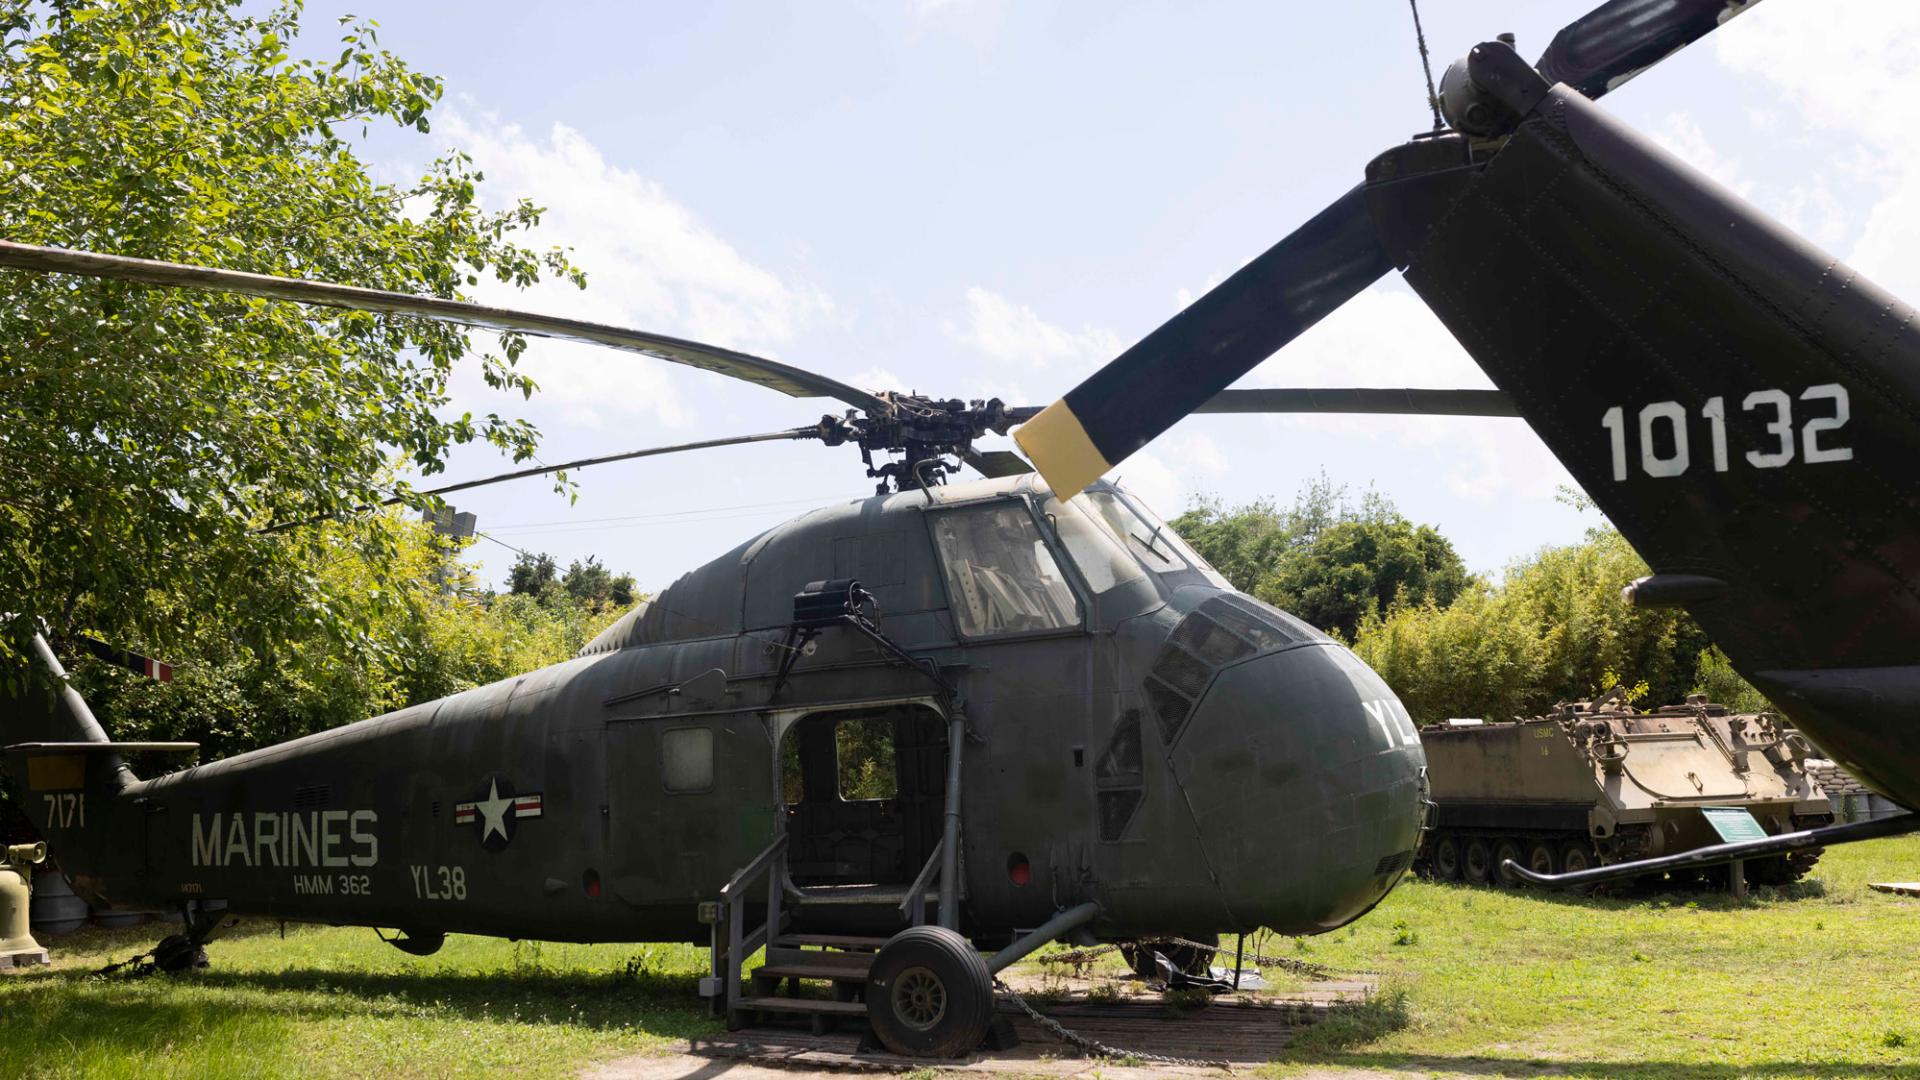 A marine helicopter used in Vietnam War